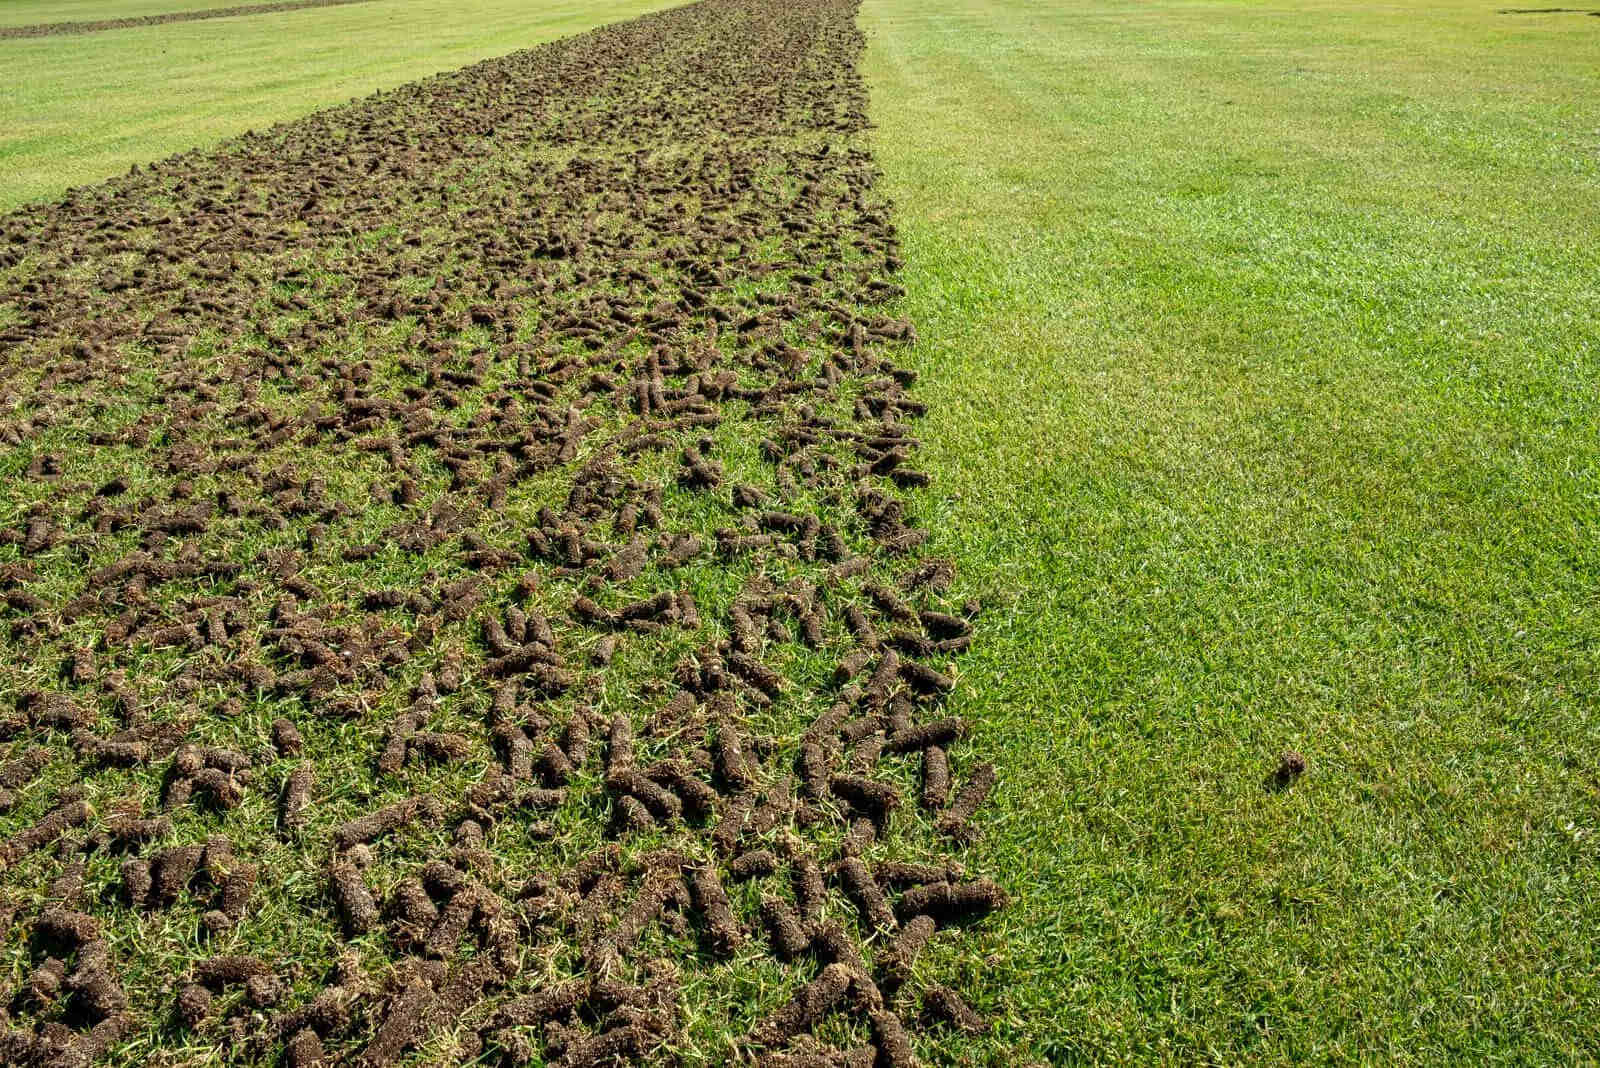 How Long After Aerating Should You Seed